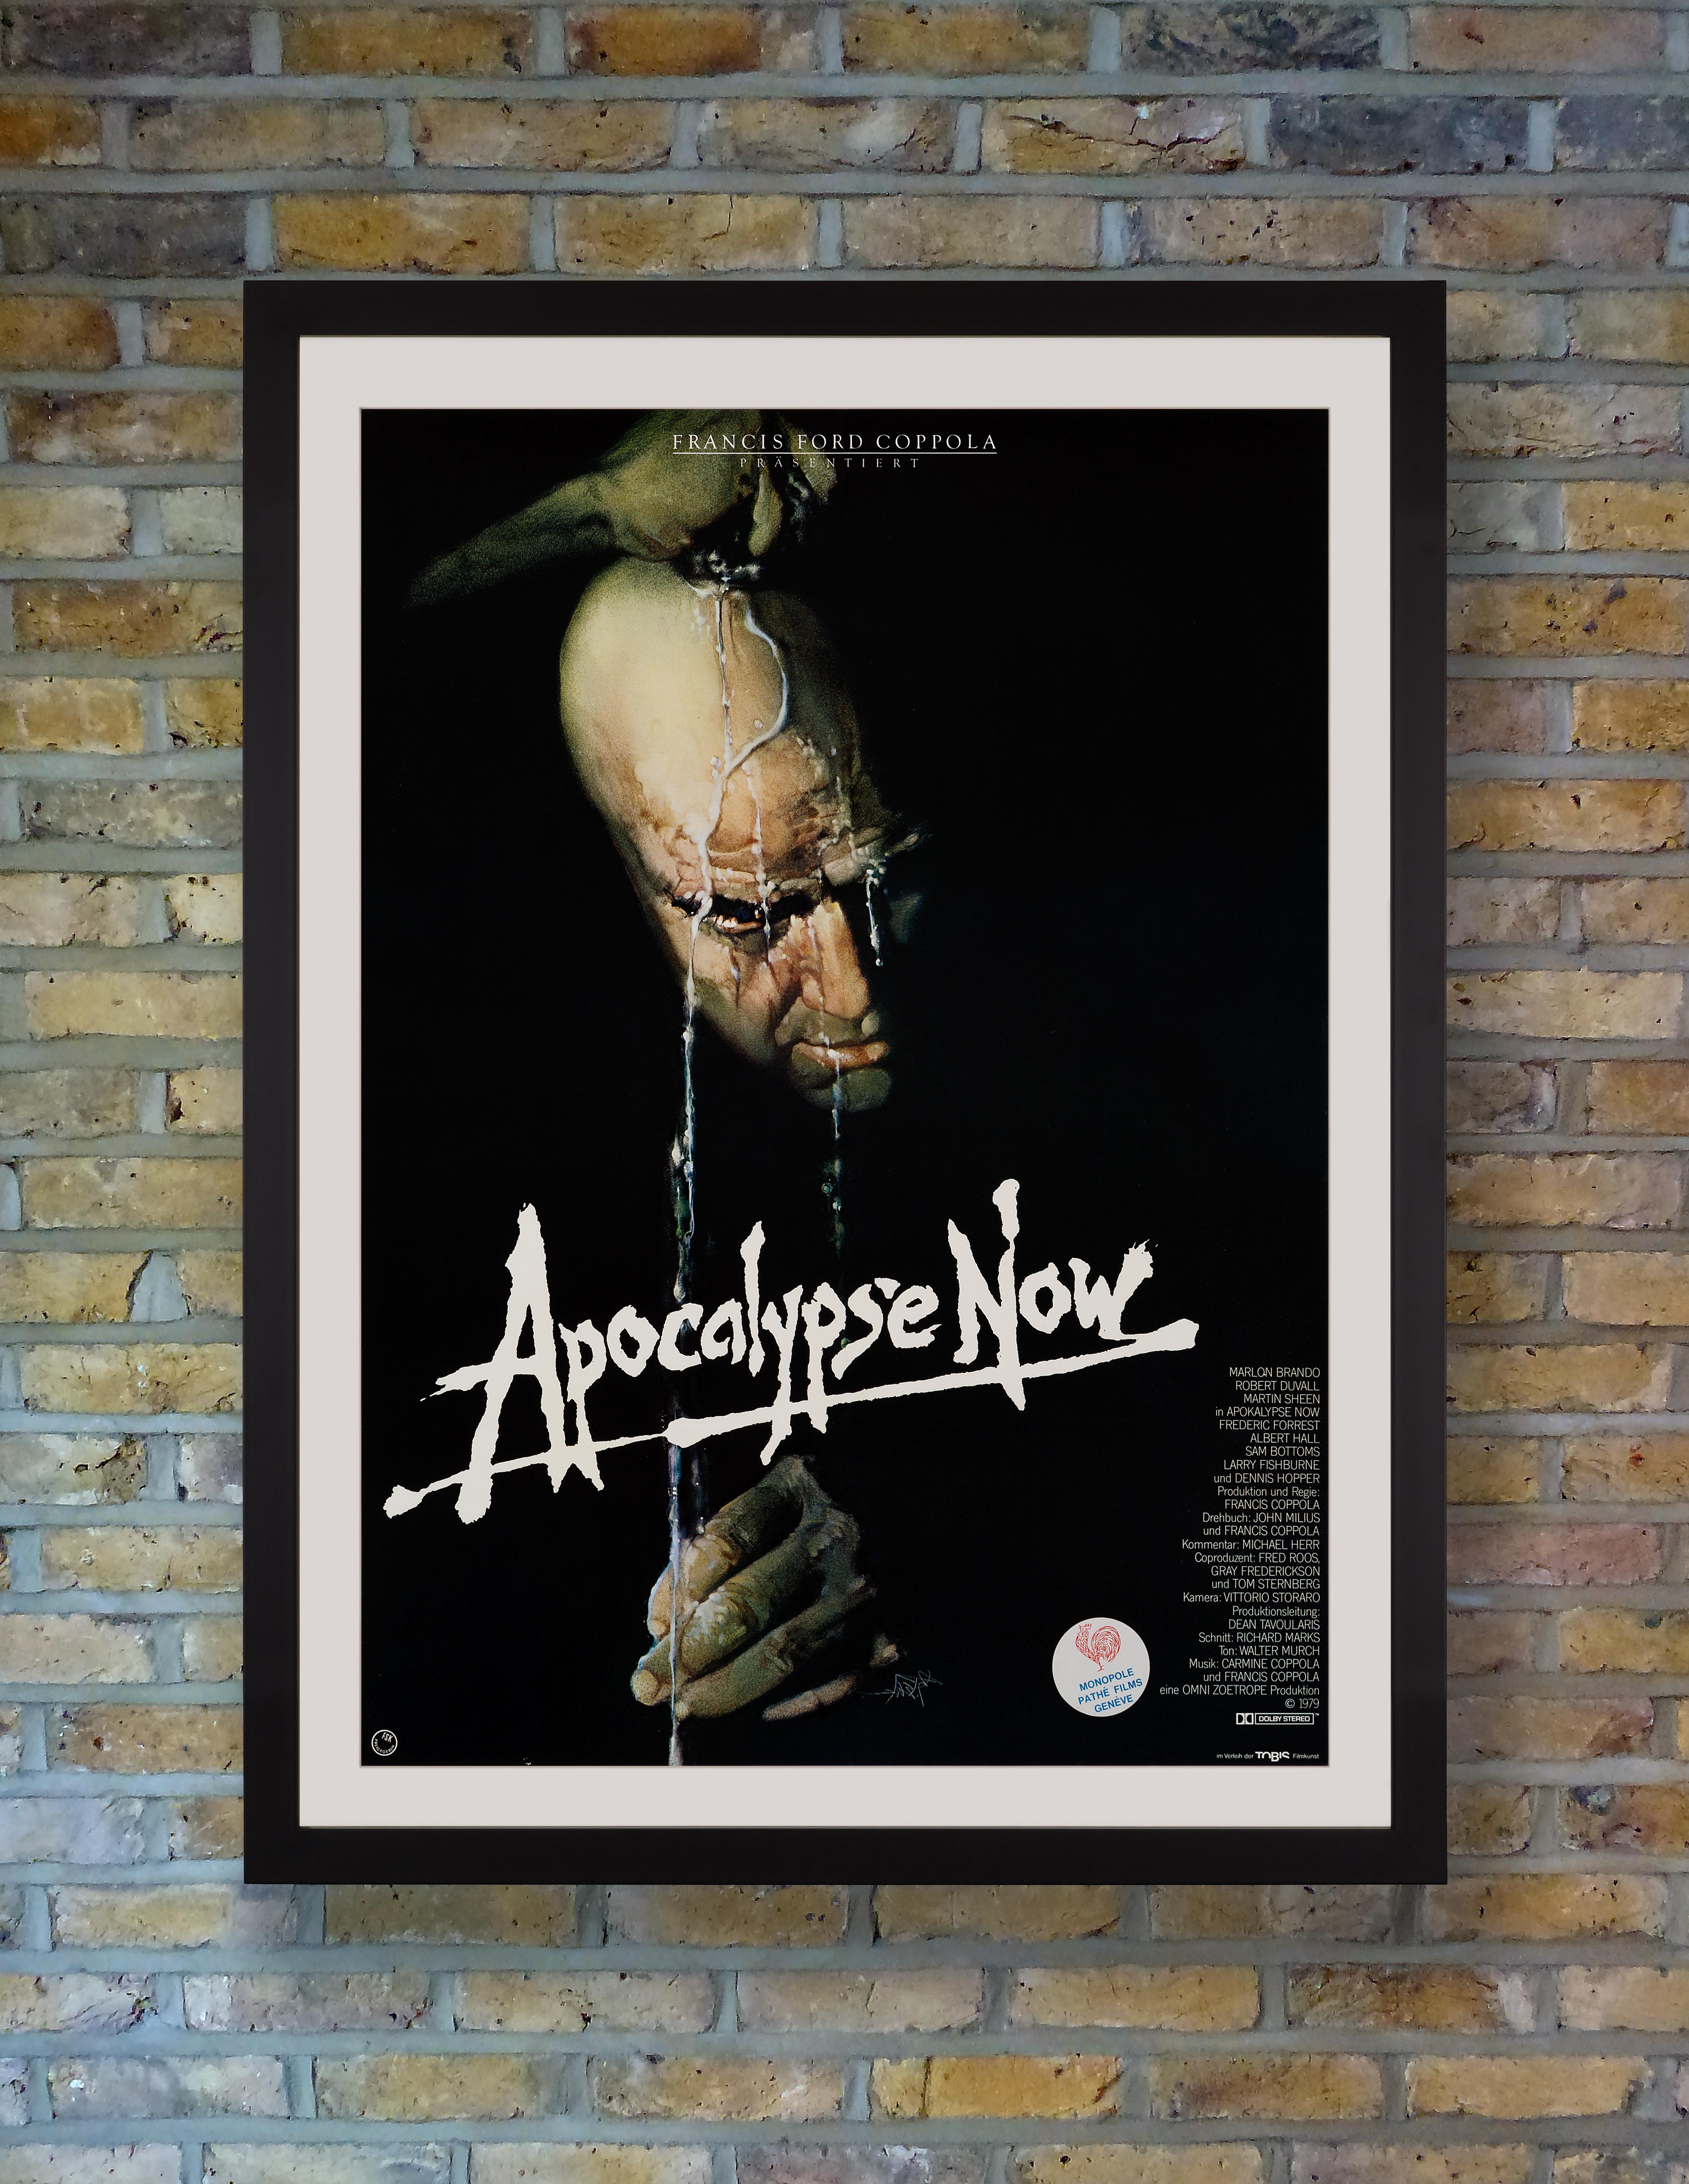 German A1, Style C
Conservation backed on linen
Art by Bob Peak

Widely considered one of the best war movies ever made, Francis Ford Coppola's 1979 Vietnam War epic 'Apocalypse Now' follows Martin Sheen's US Army Captain as he journeys up the